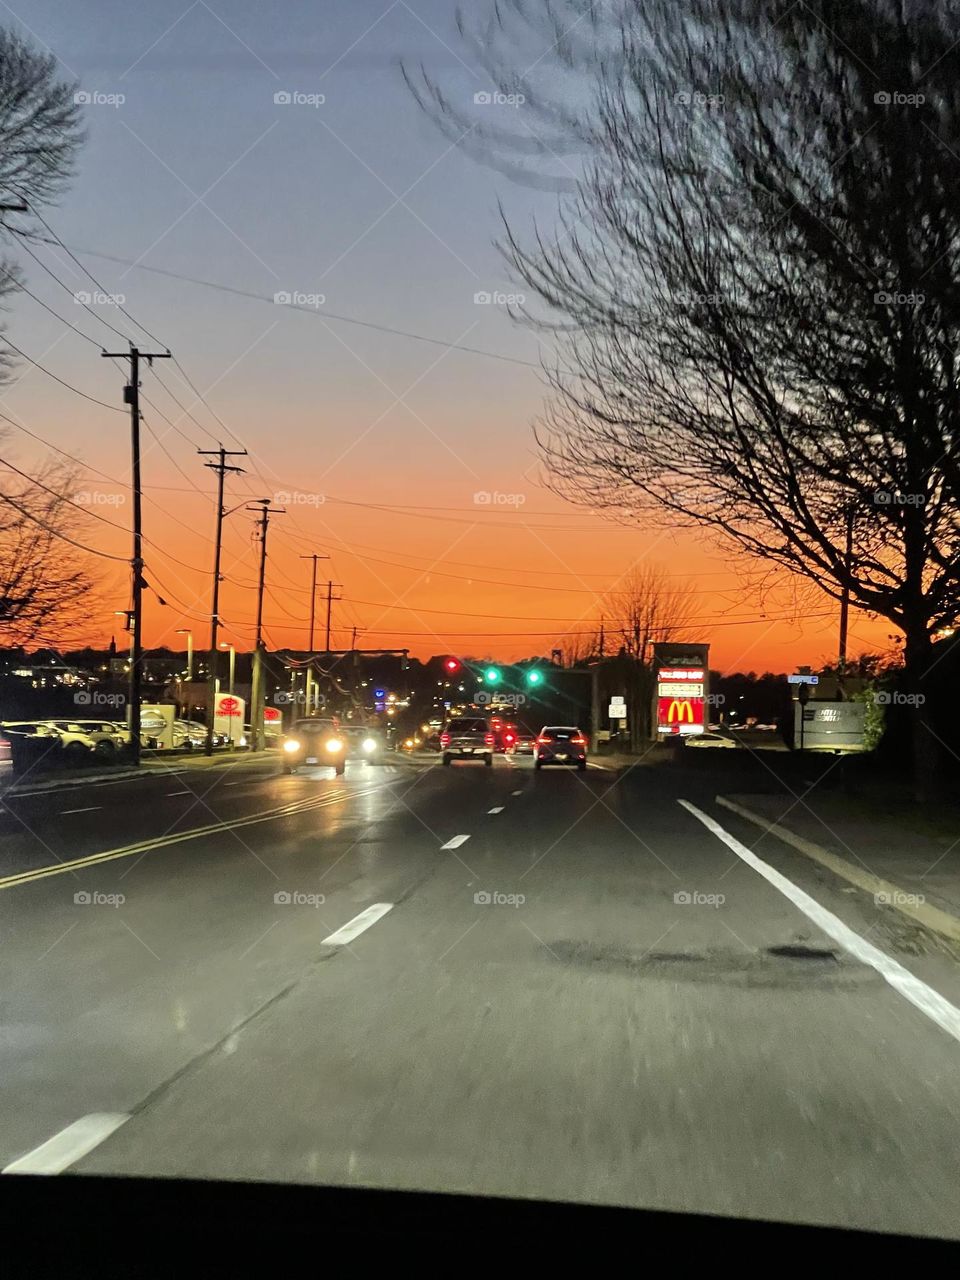 A joy ride, down a busy street, where a road has been traveled, where a moment is waiting and floating to the next. Questions of going and coming. Food is awaiting just beyond the sunset, or before. People with people in the car. 